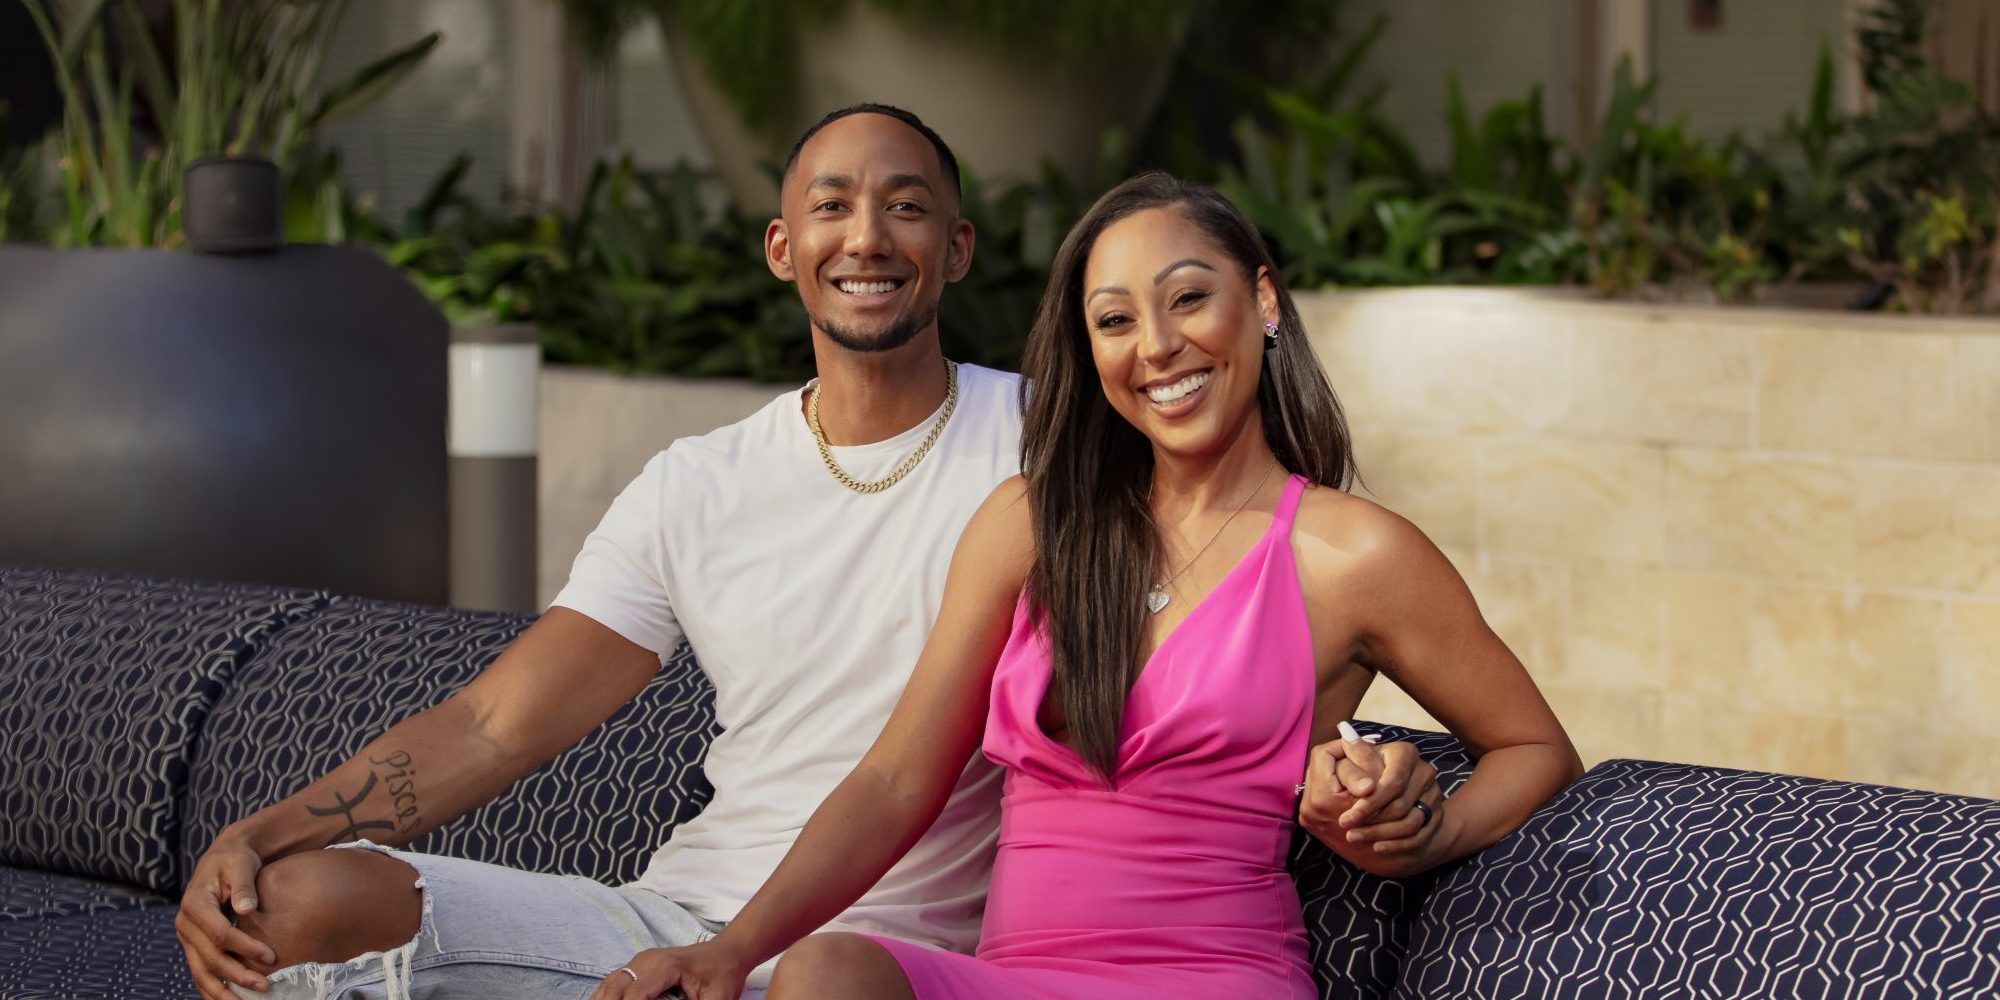 Nate and Stacia sitting on couch and smiling for a photo in Married At First Sight